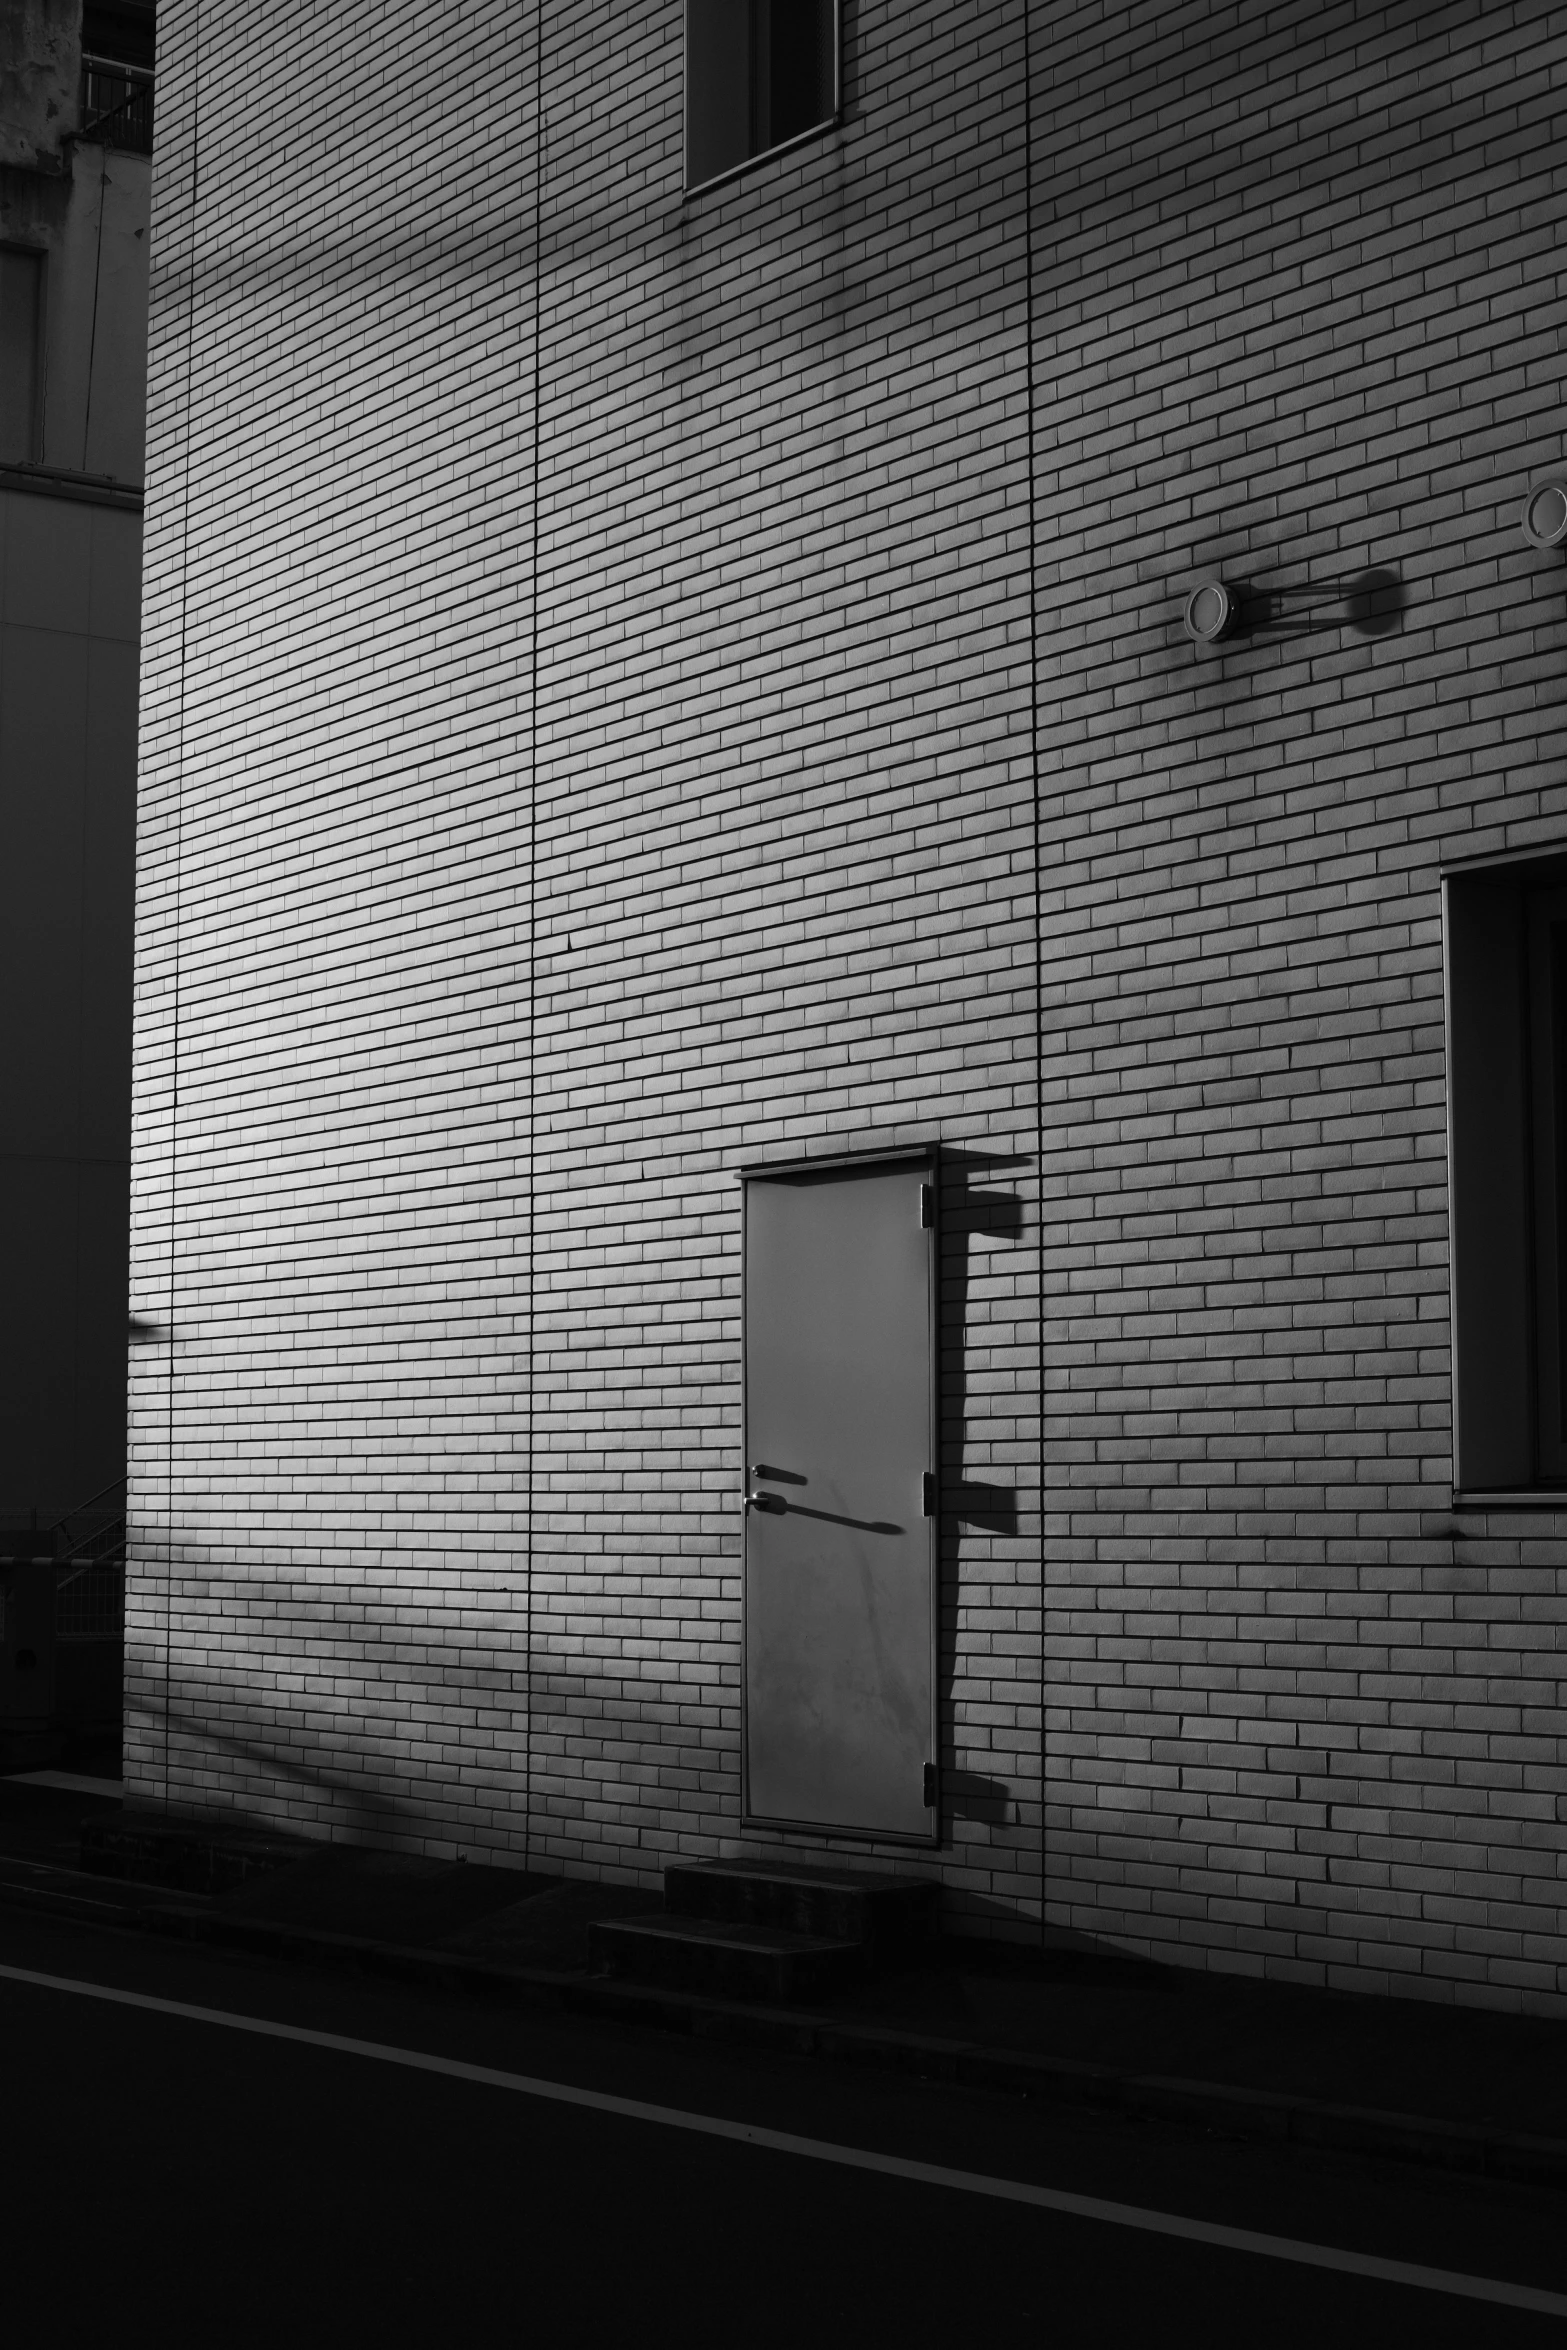 a black and white photo of a building, a black and white photo, unsplash, postminimalism, door to lab, evening sunlight, bricks, in tokio